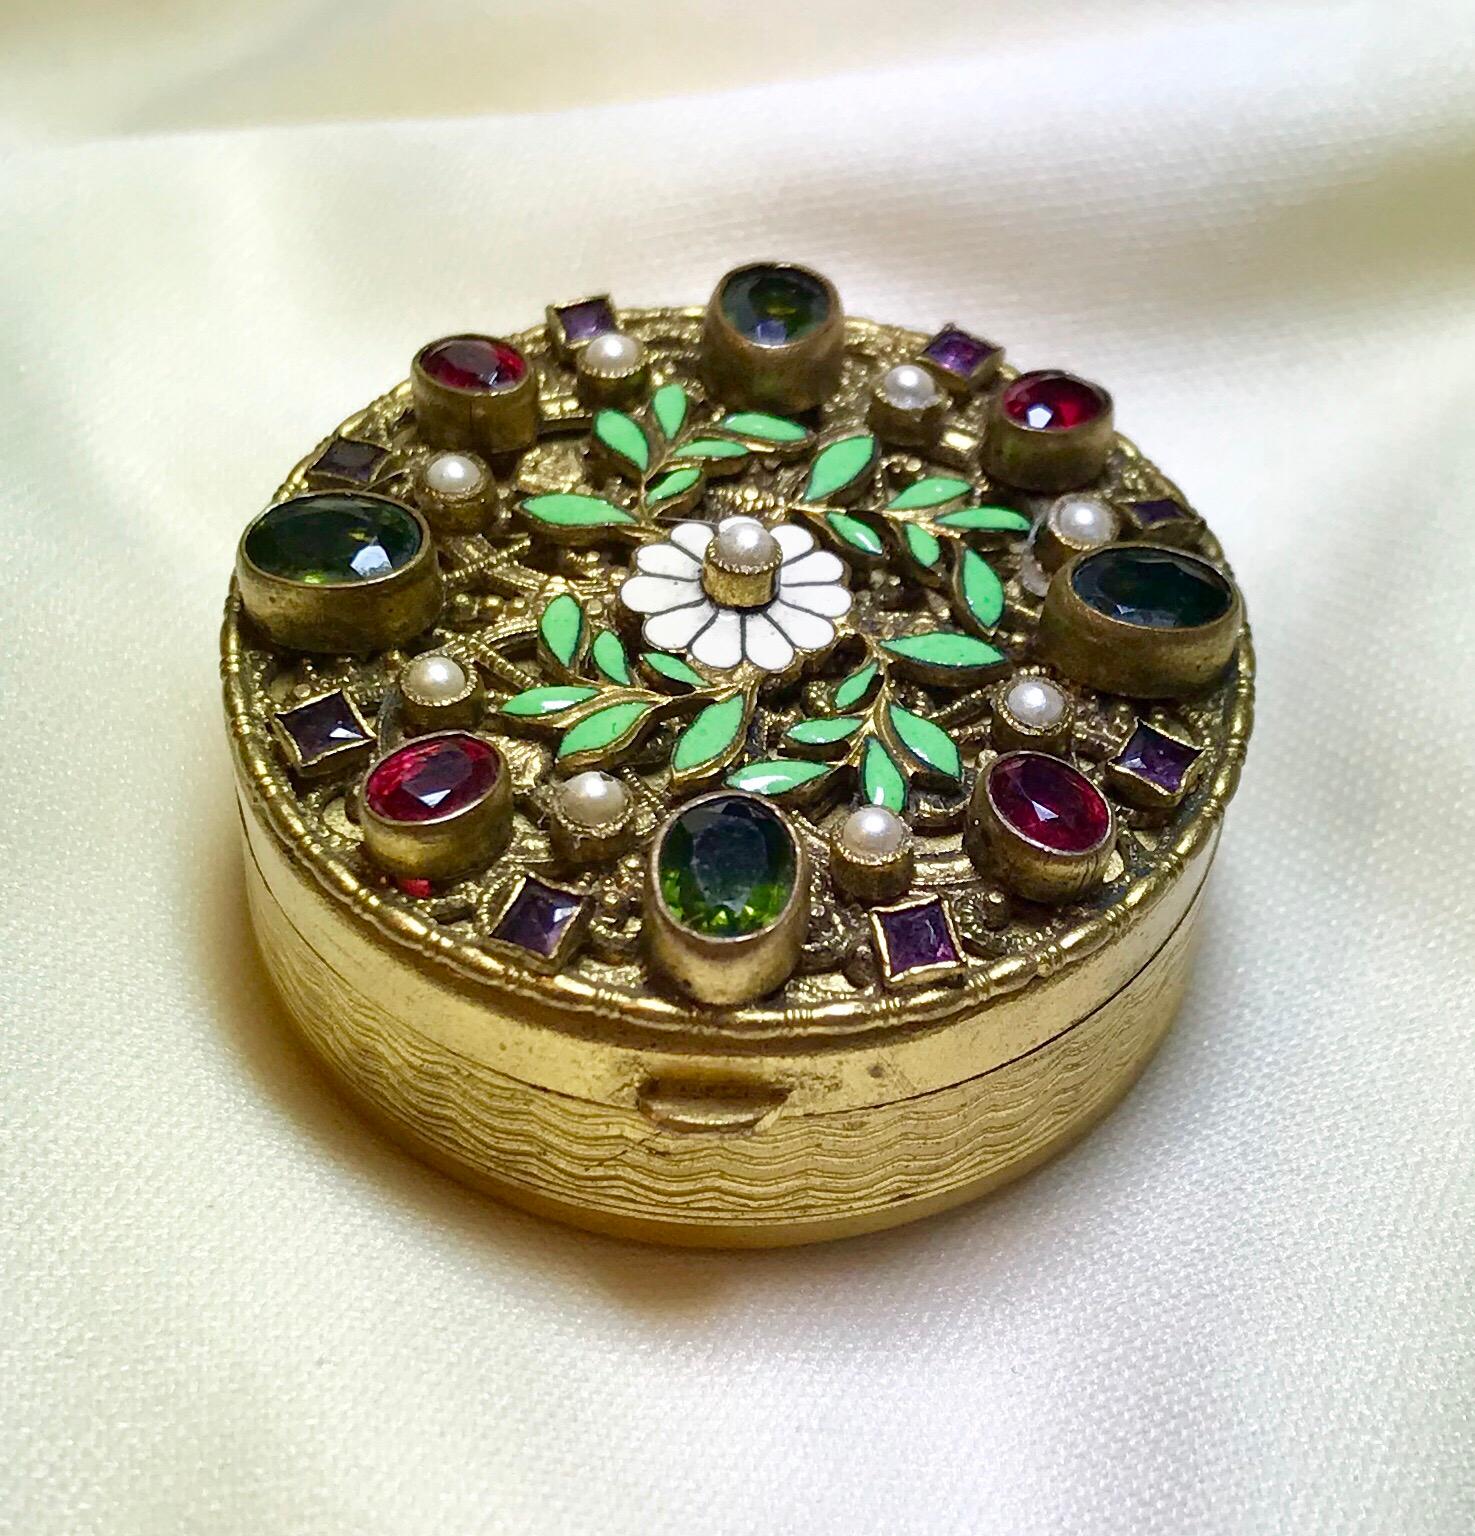 Circa 1920s gold tone Austrian powder compact with an engine turned design around the sides and on the bottom.  The top of the compact has an enameled floral and leaf design and is bezel set with faceted glass round and oval stones in green, red and